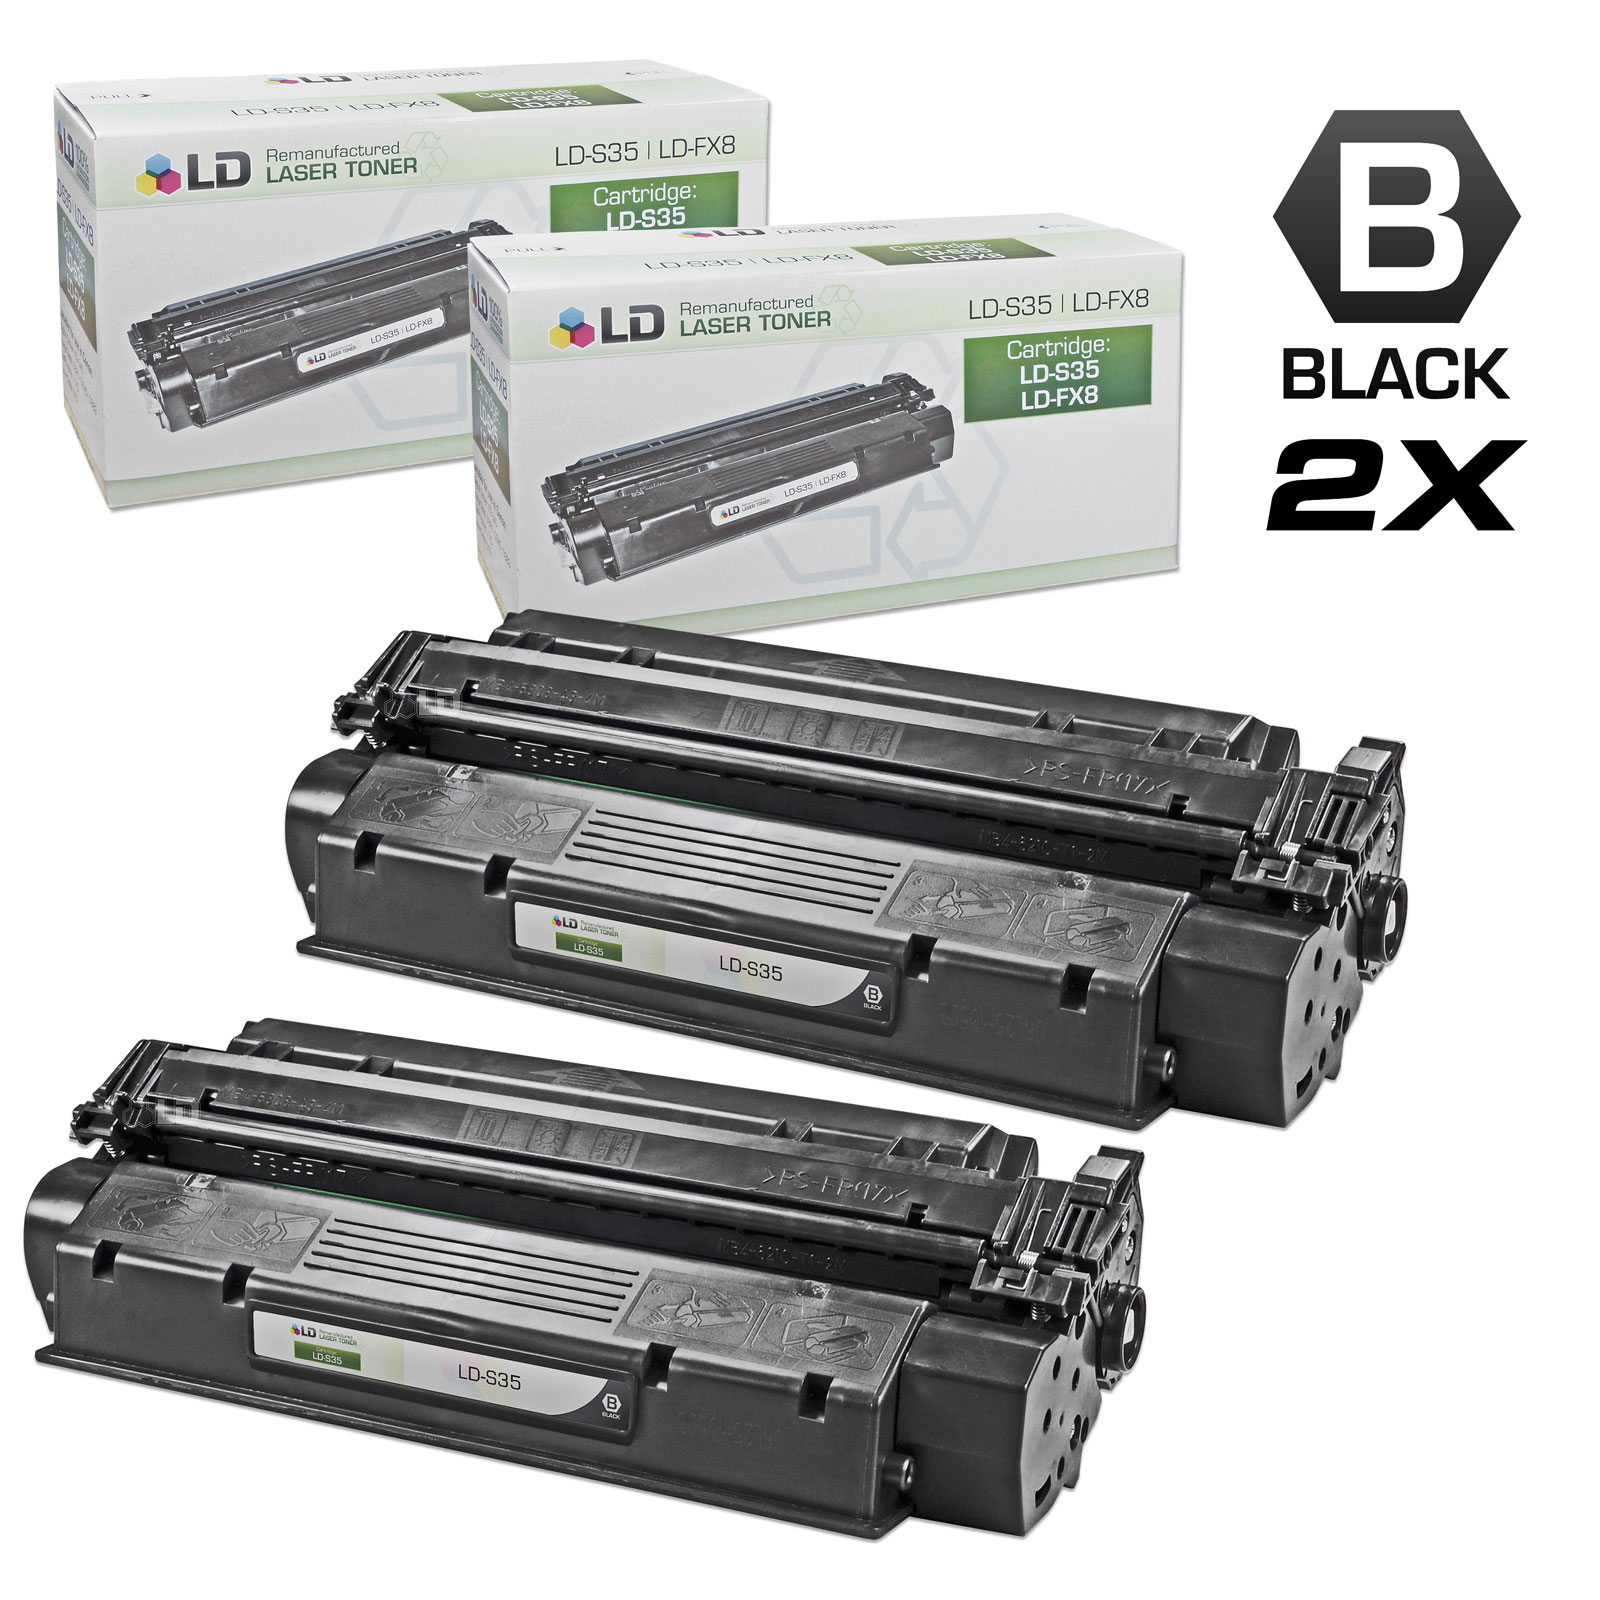 Canon Remanufactured S35 (7833A001AA) Set of 2 Black Laser Toner Cartridges - image 1 of 2